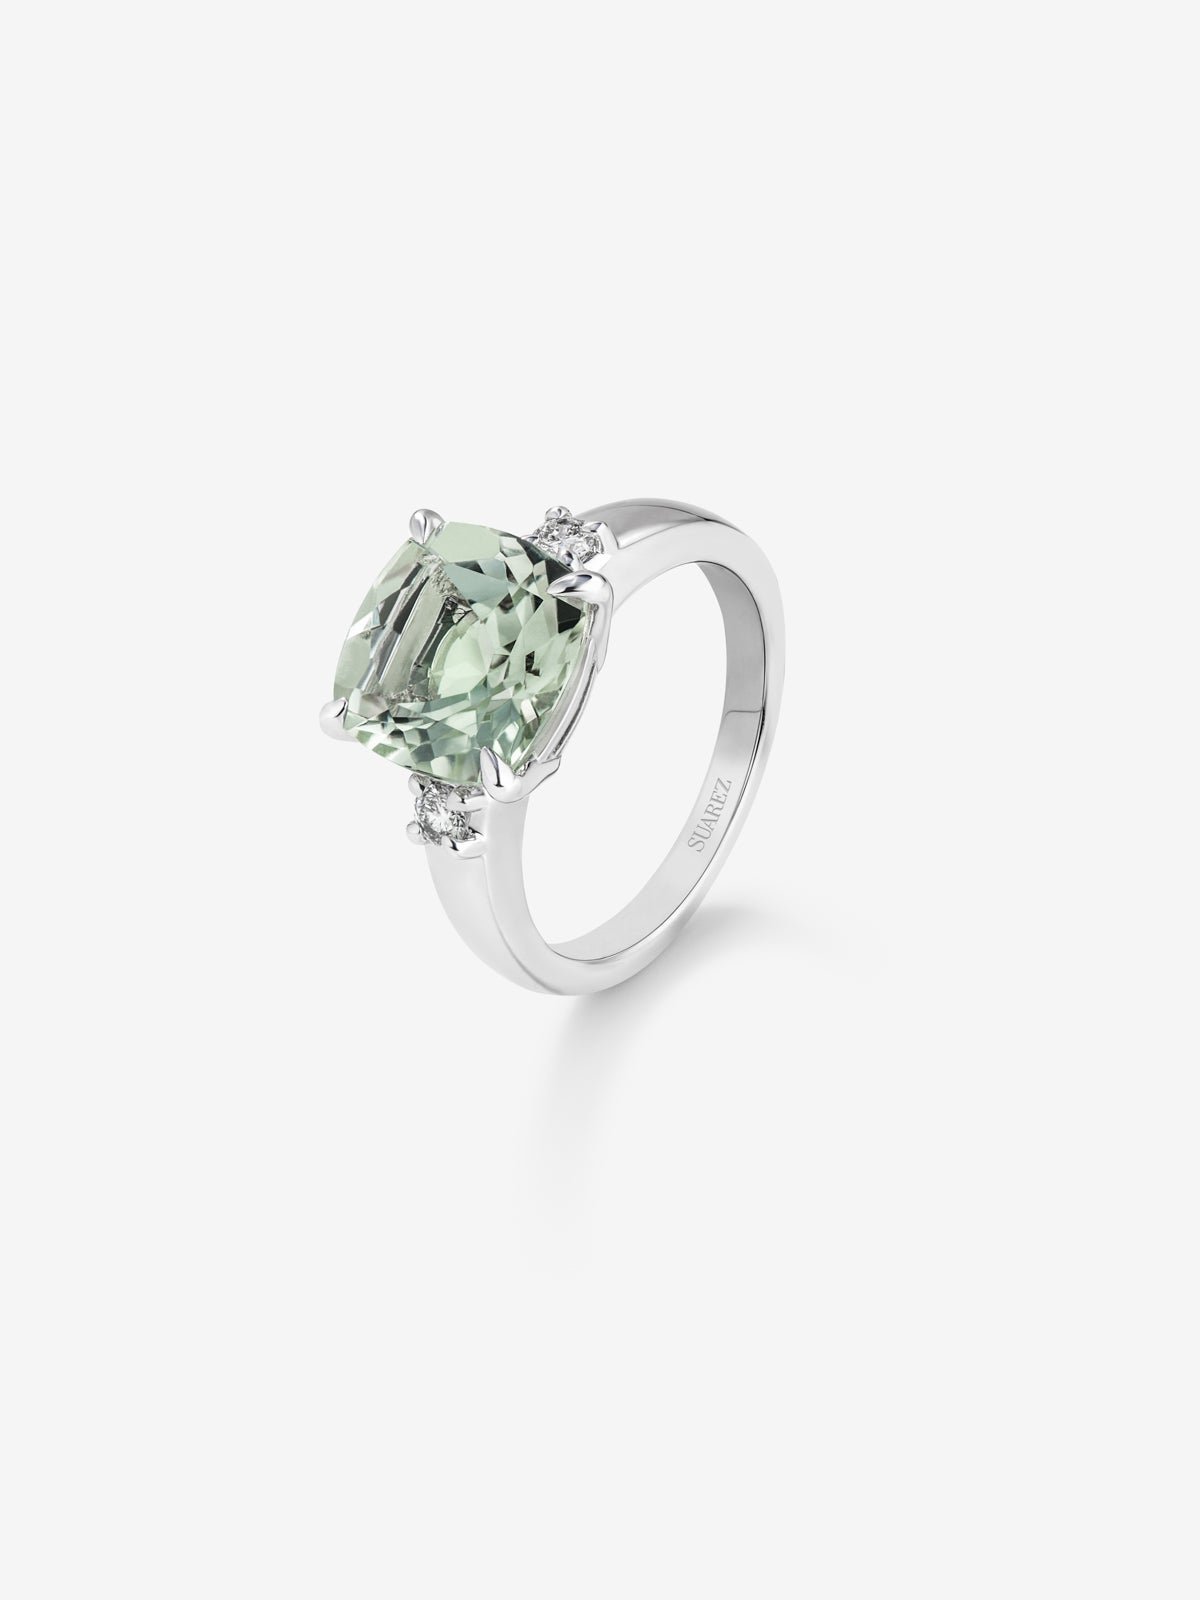 925 silver triple ring with cushion-cut green amethyst of 3.95 cts and 2 brilliant-cut diamonds with a total of 0.12 cts